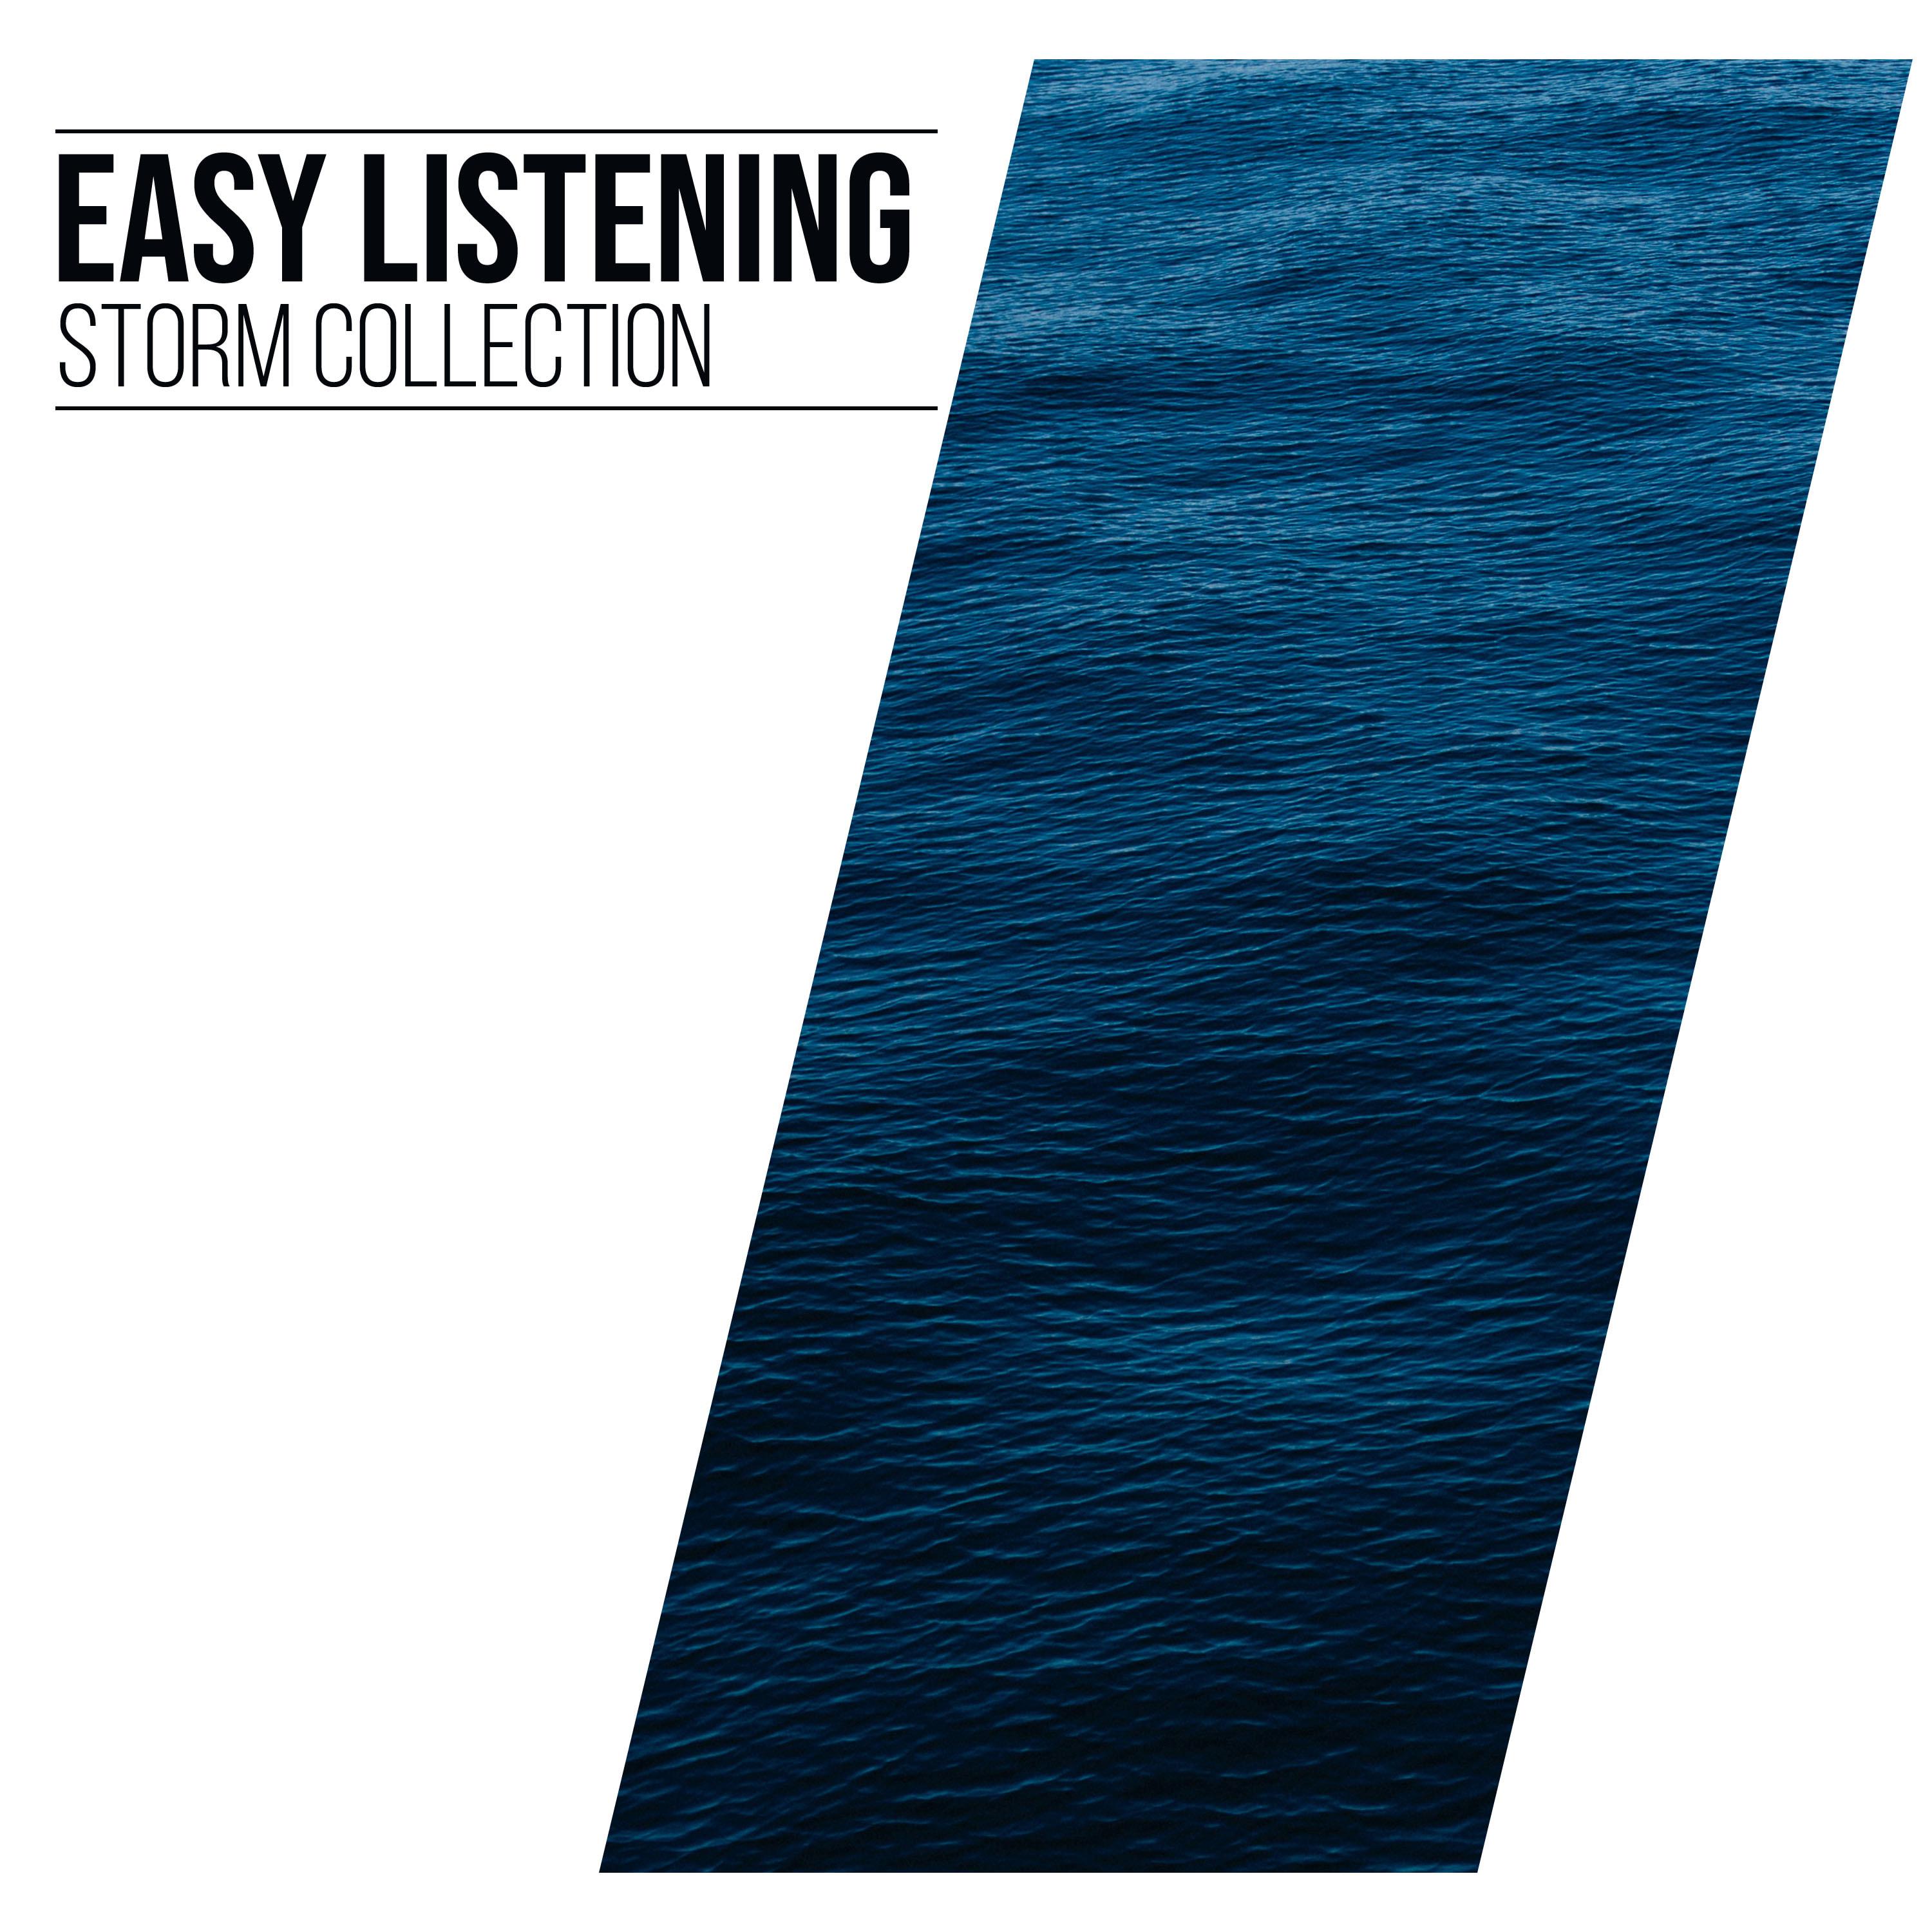 #17 Easy Listening Storm Collection for Spa & Sleep Relaxation